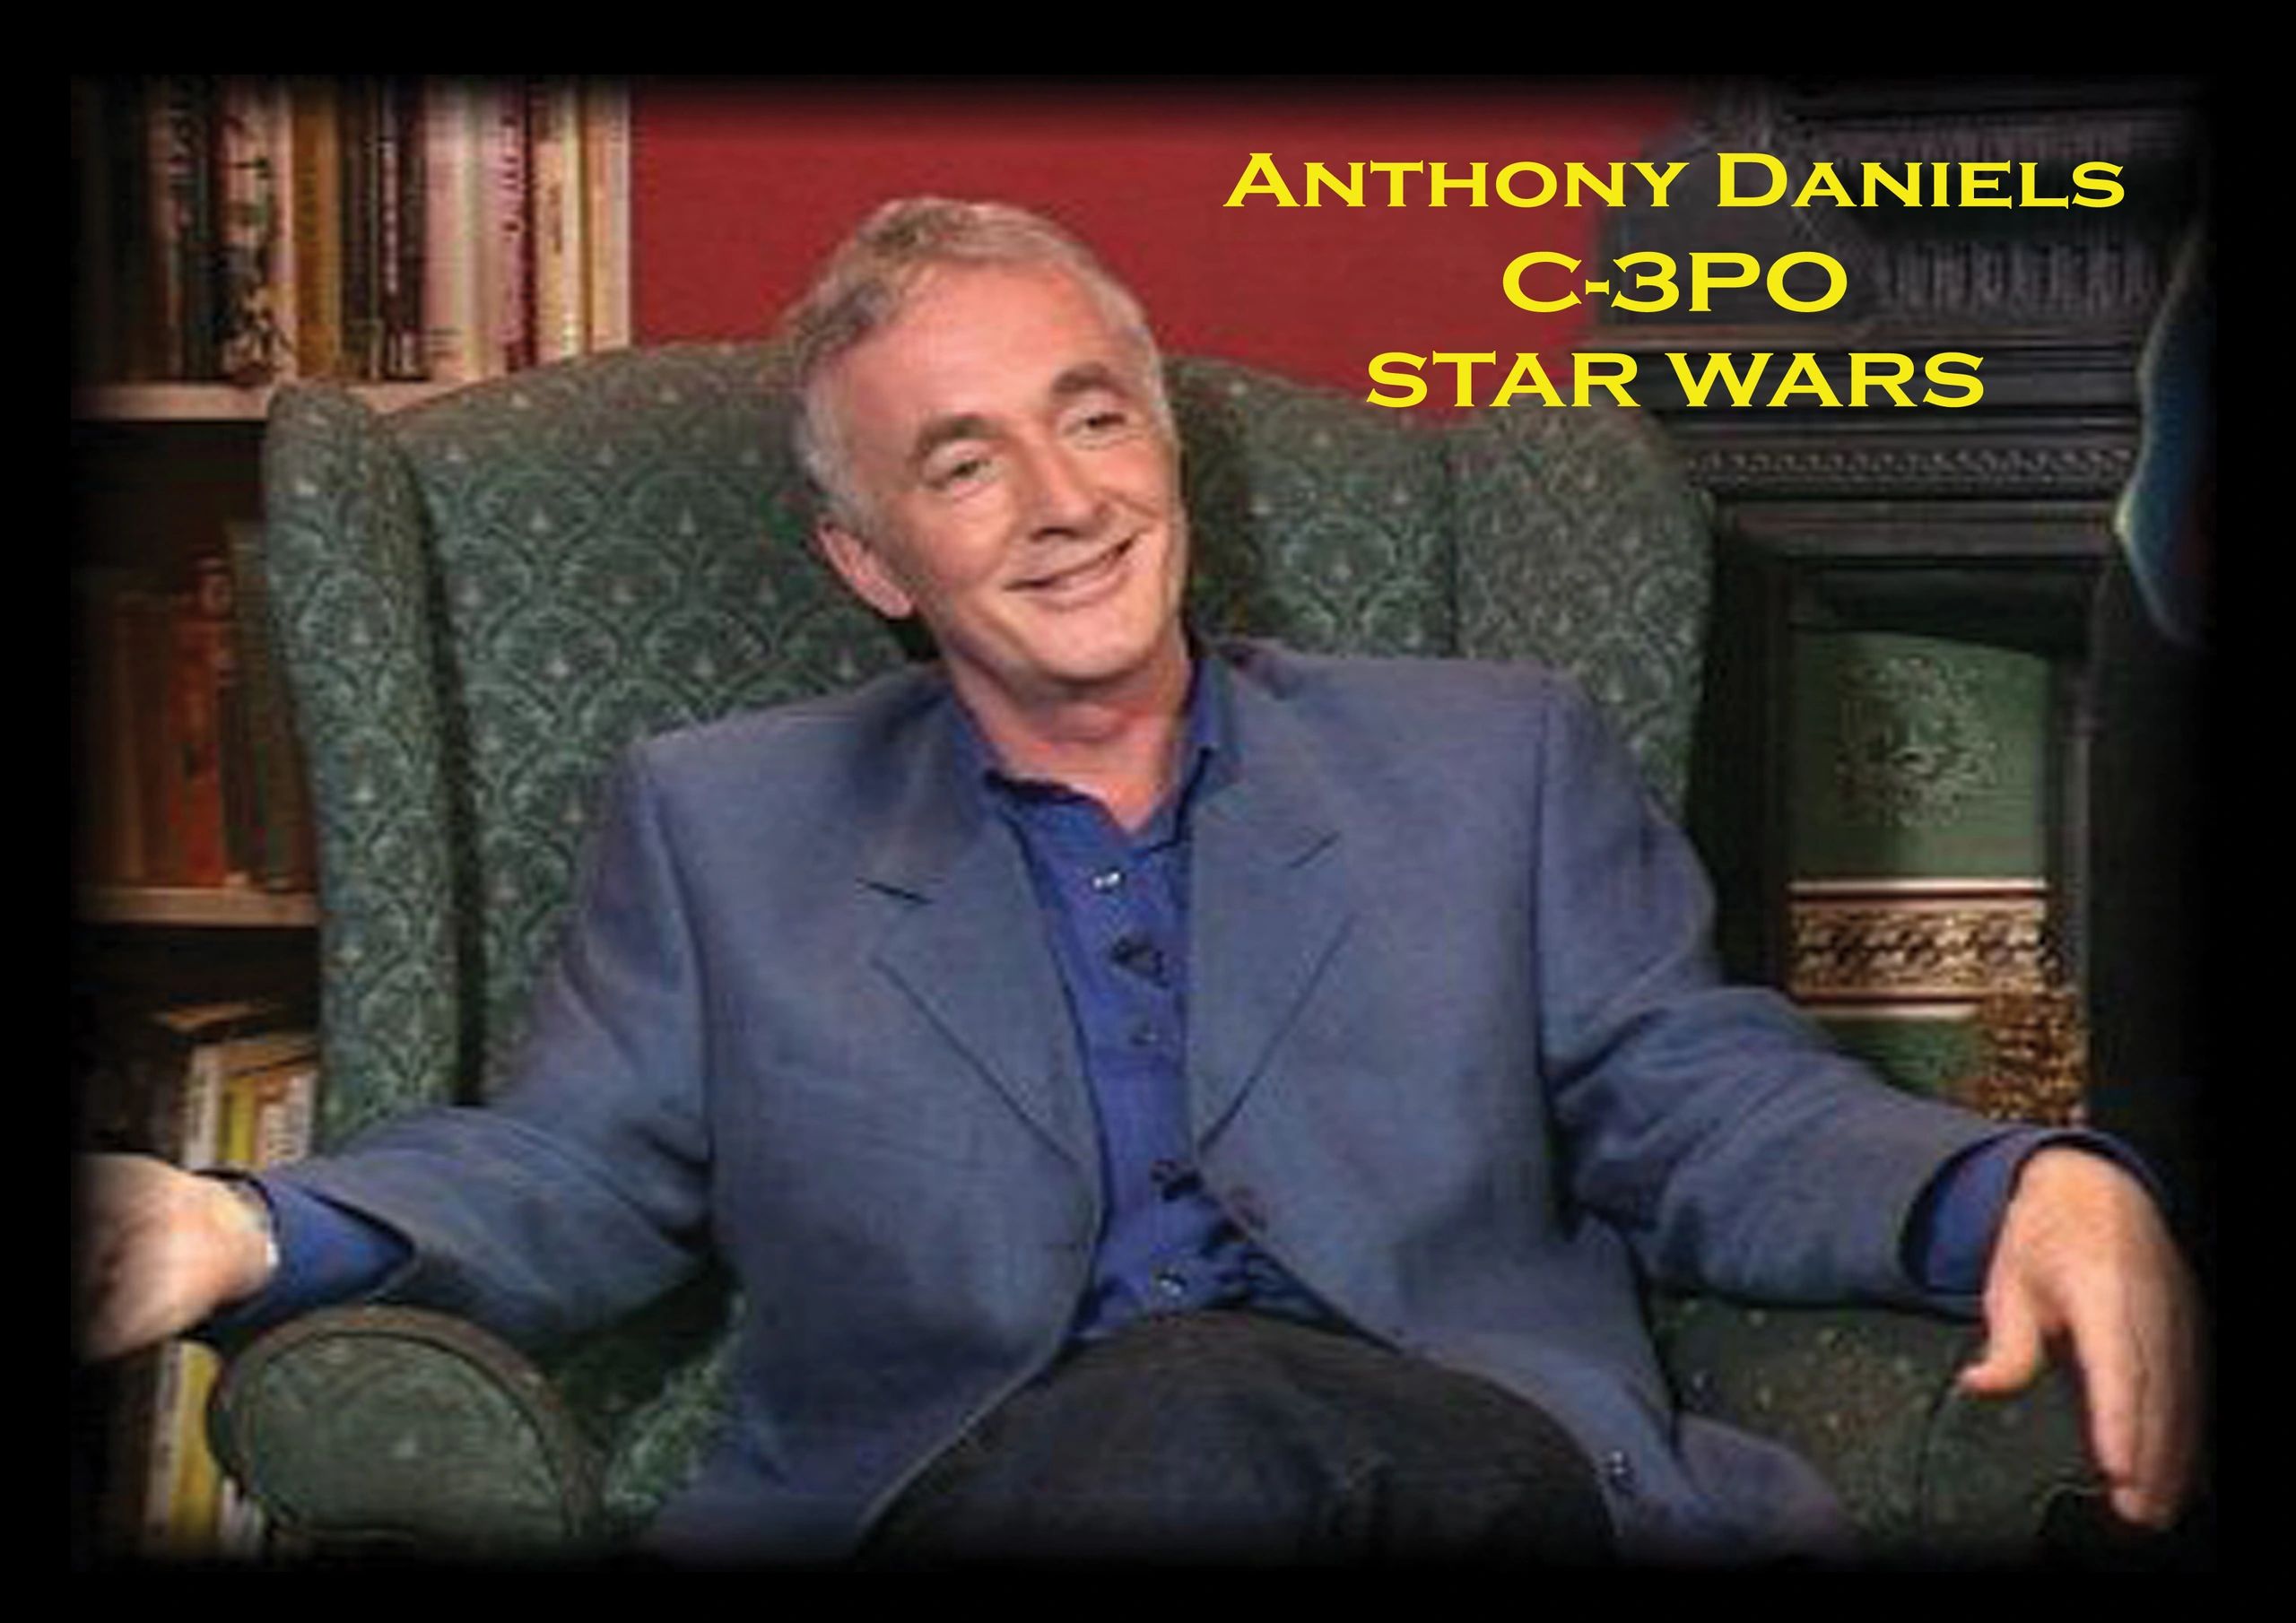 THE DARK SIDE OF THE FORCE.COM interviews presents ANTHONY DANIELS the actor who played C 3PO